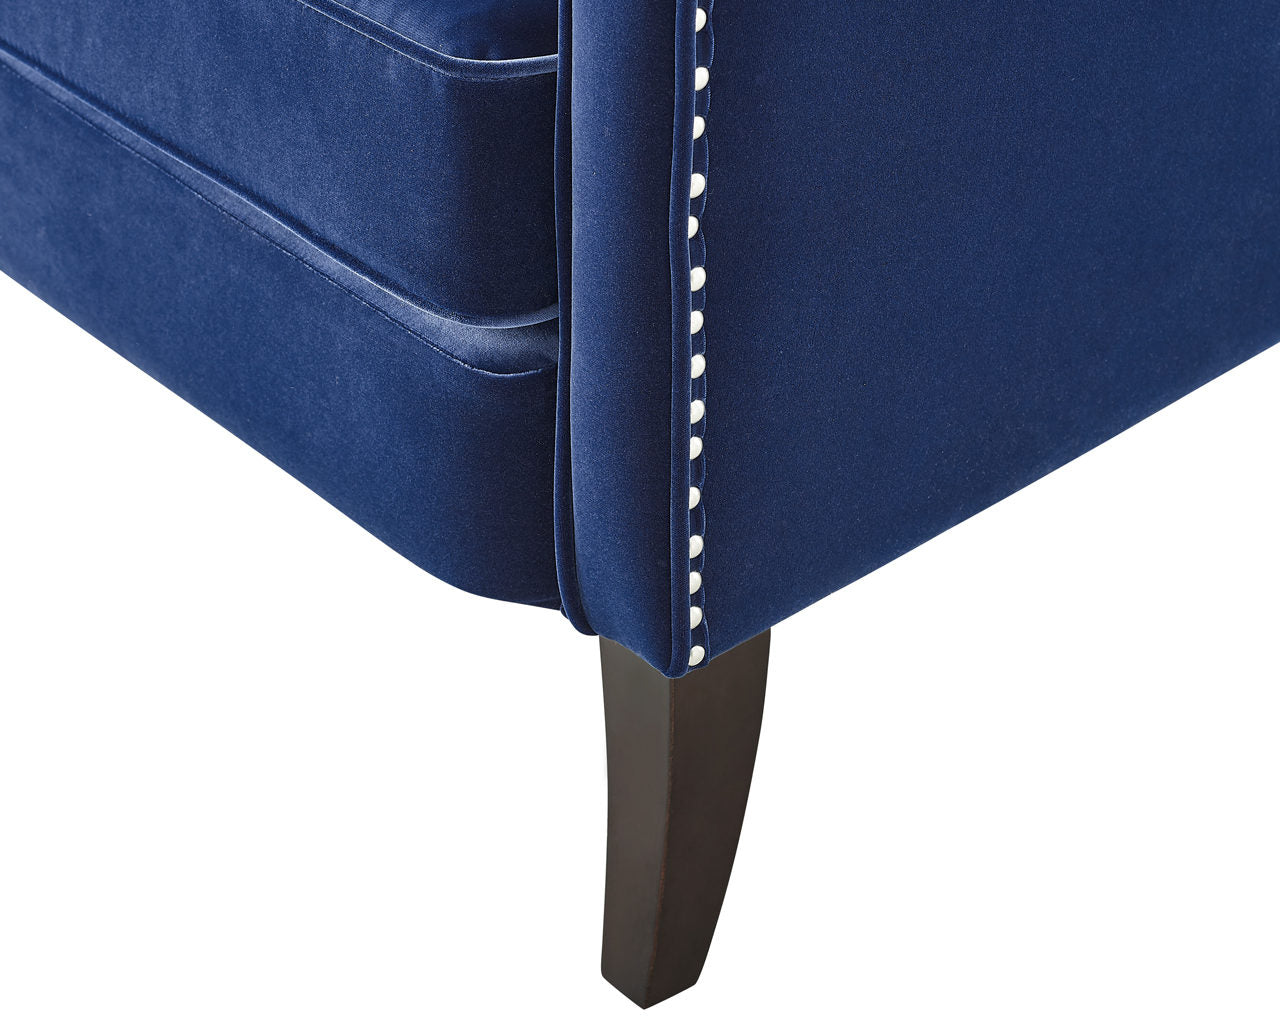 Rosco Wing Back Accent Chair – Sapphire